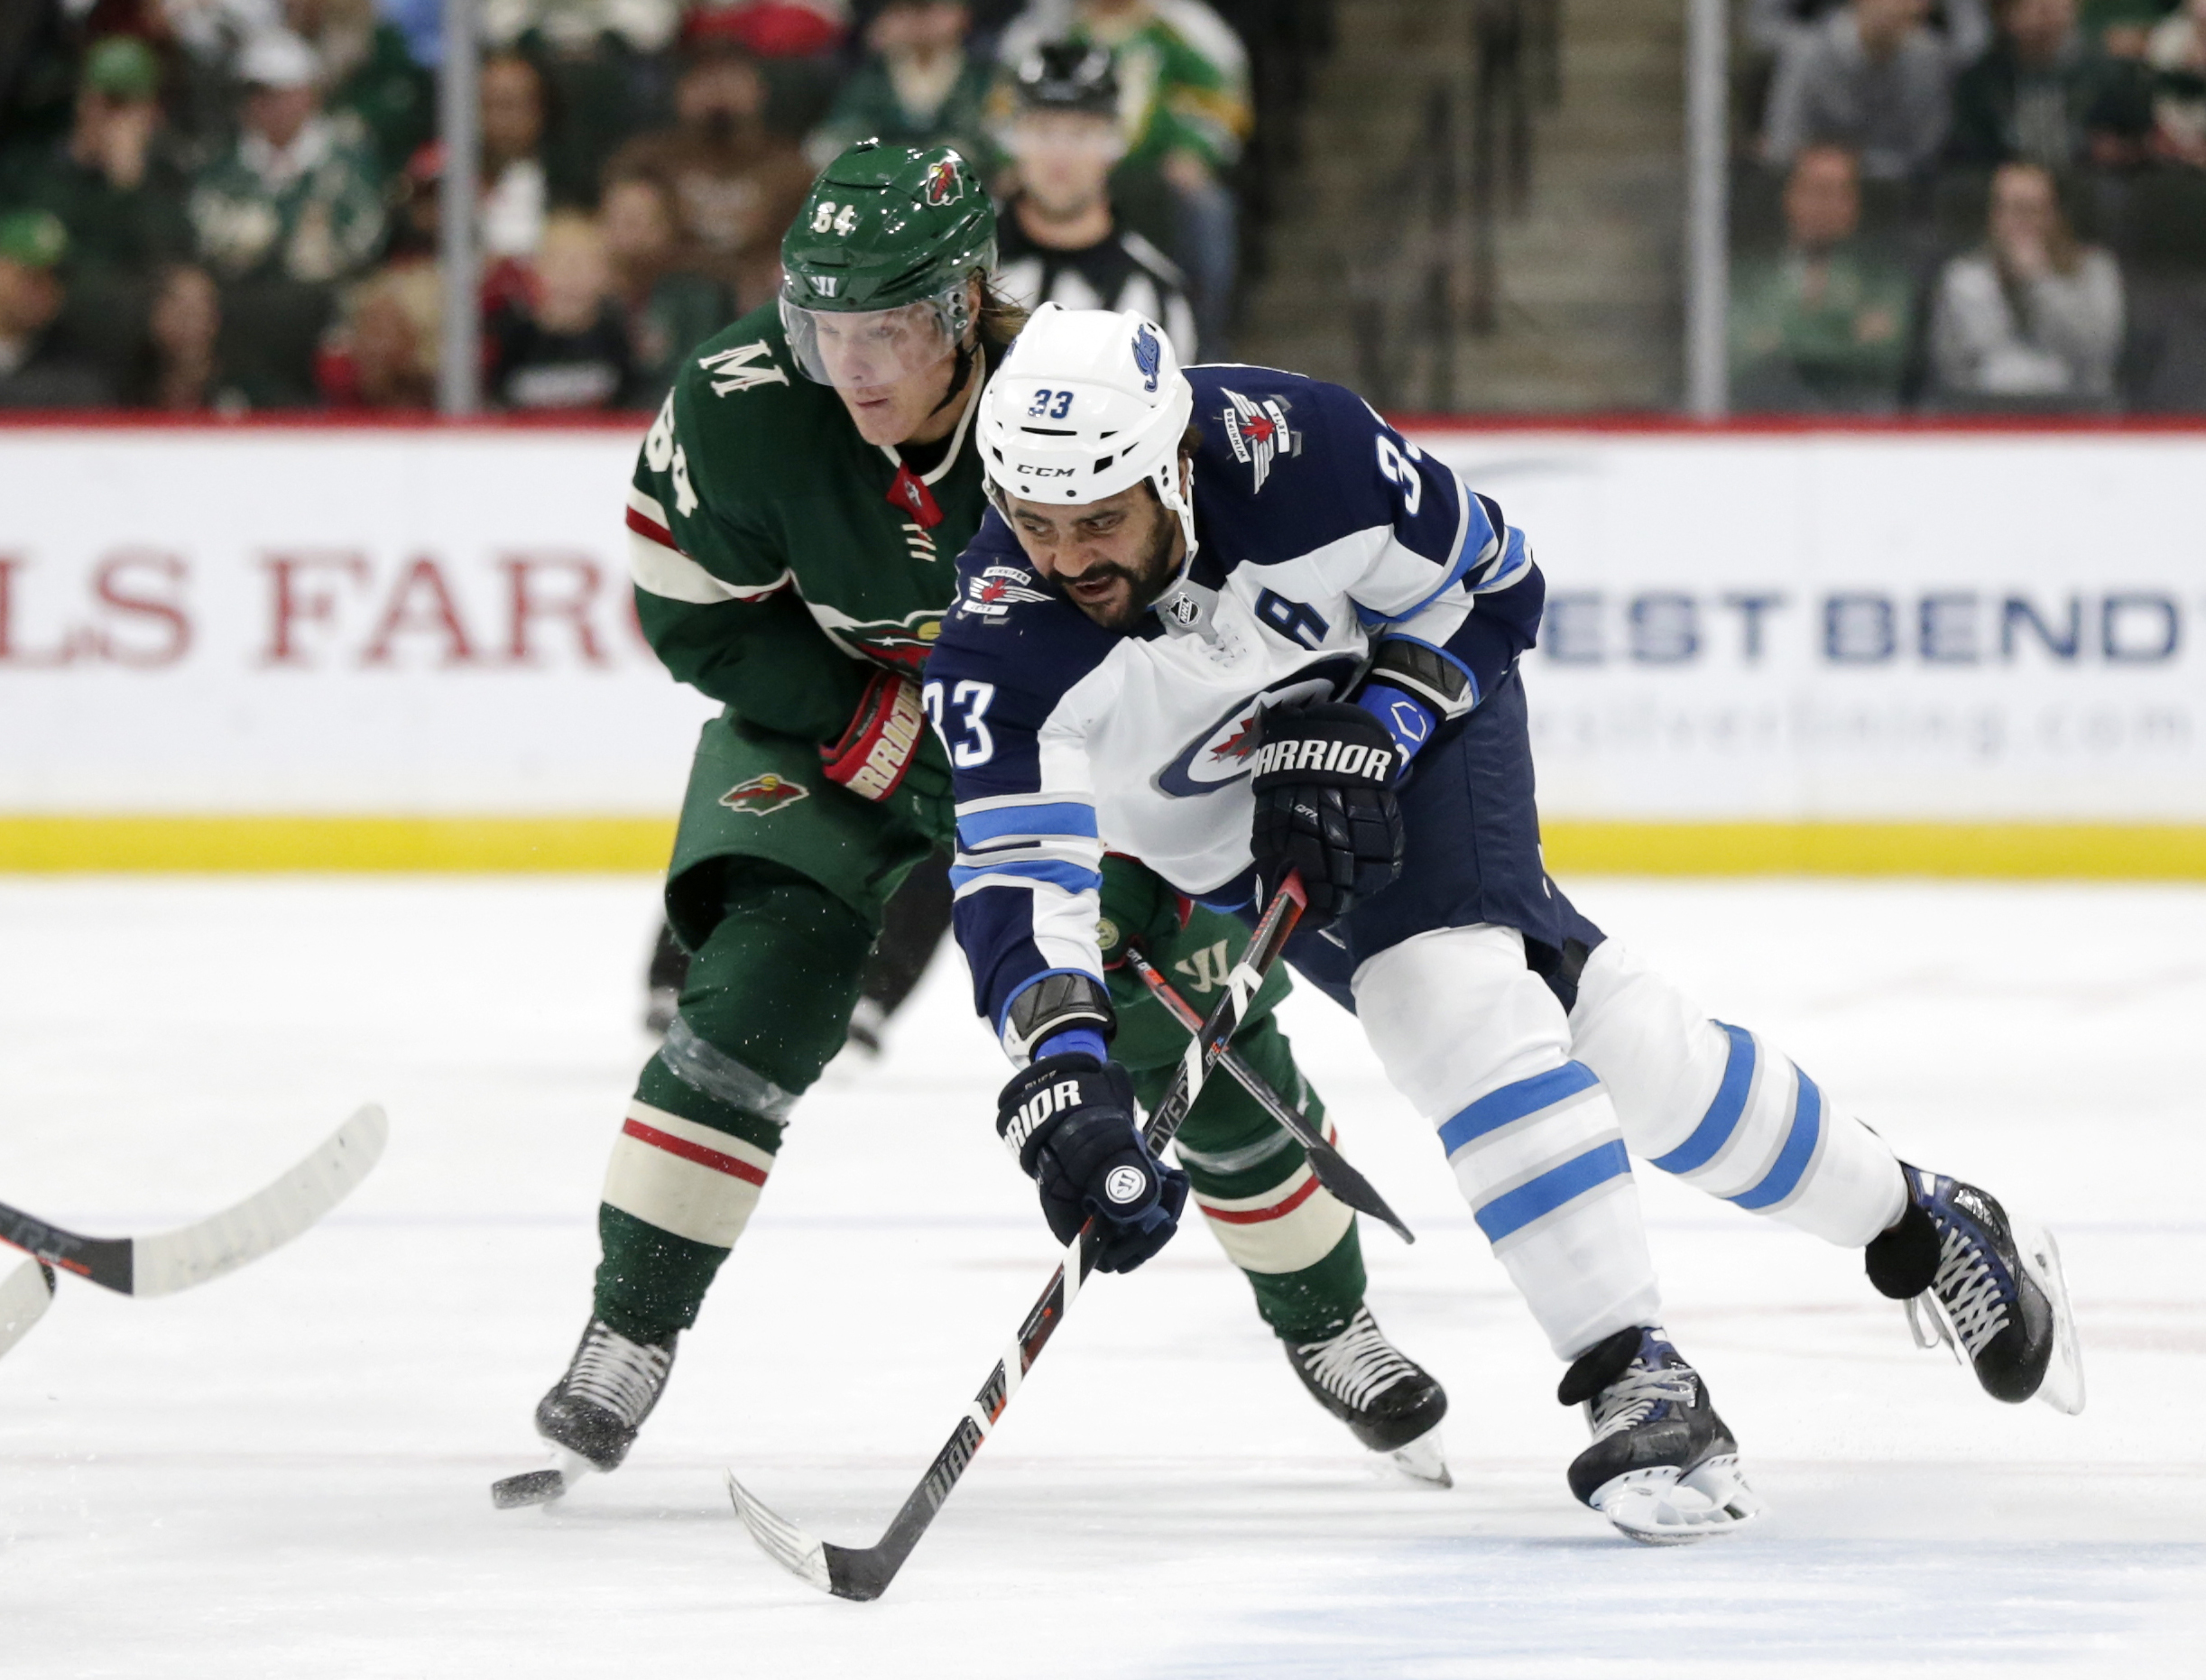 Jets, Preds, Knights and Sharks among teams to beat in West